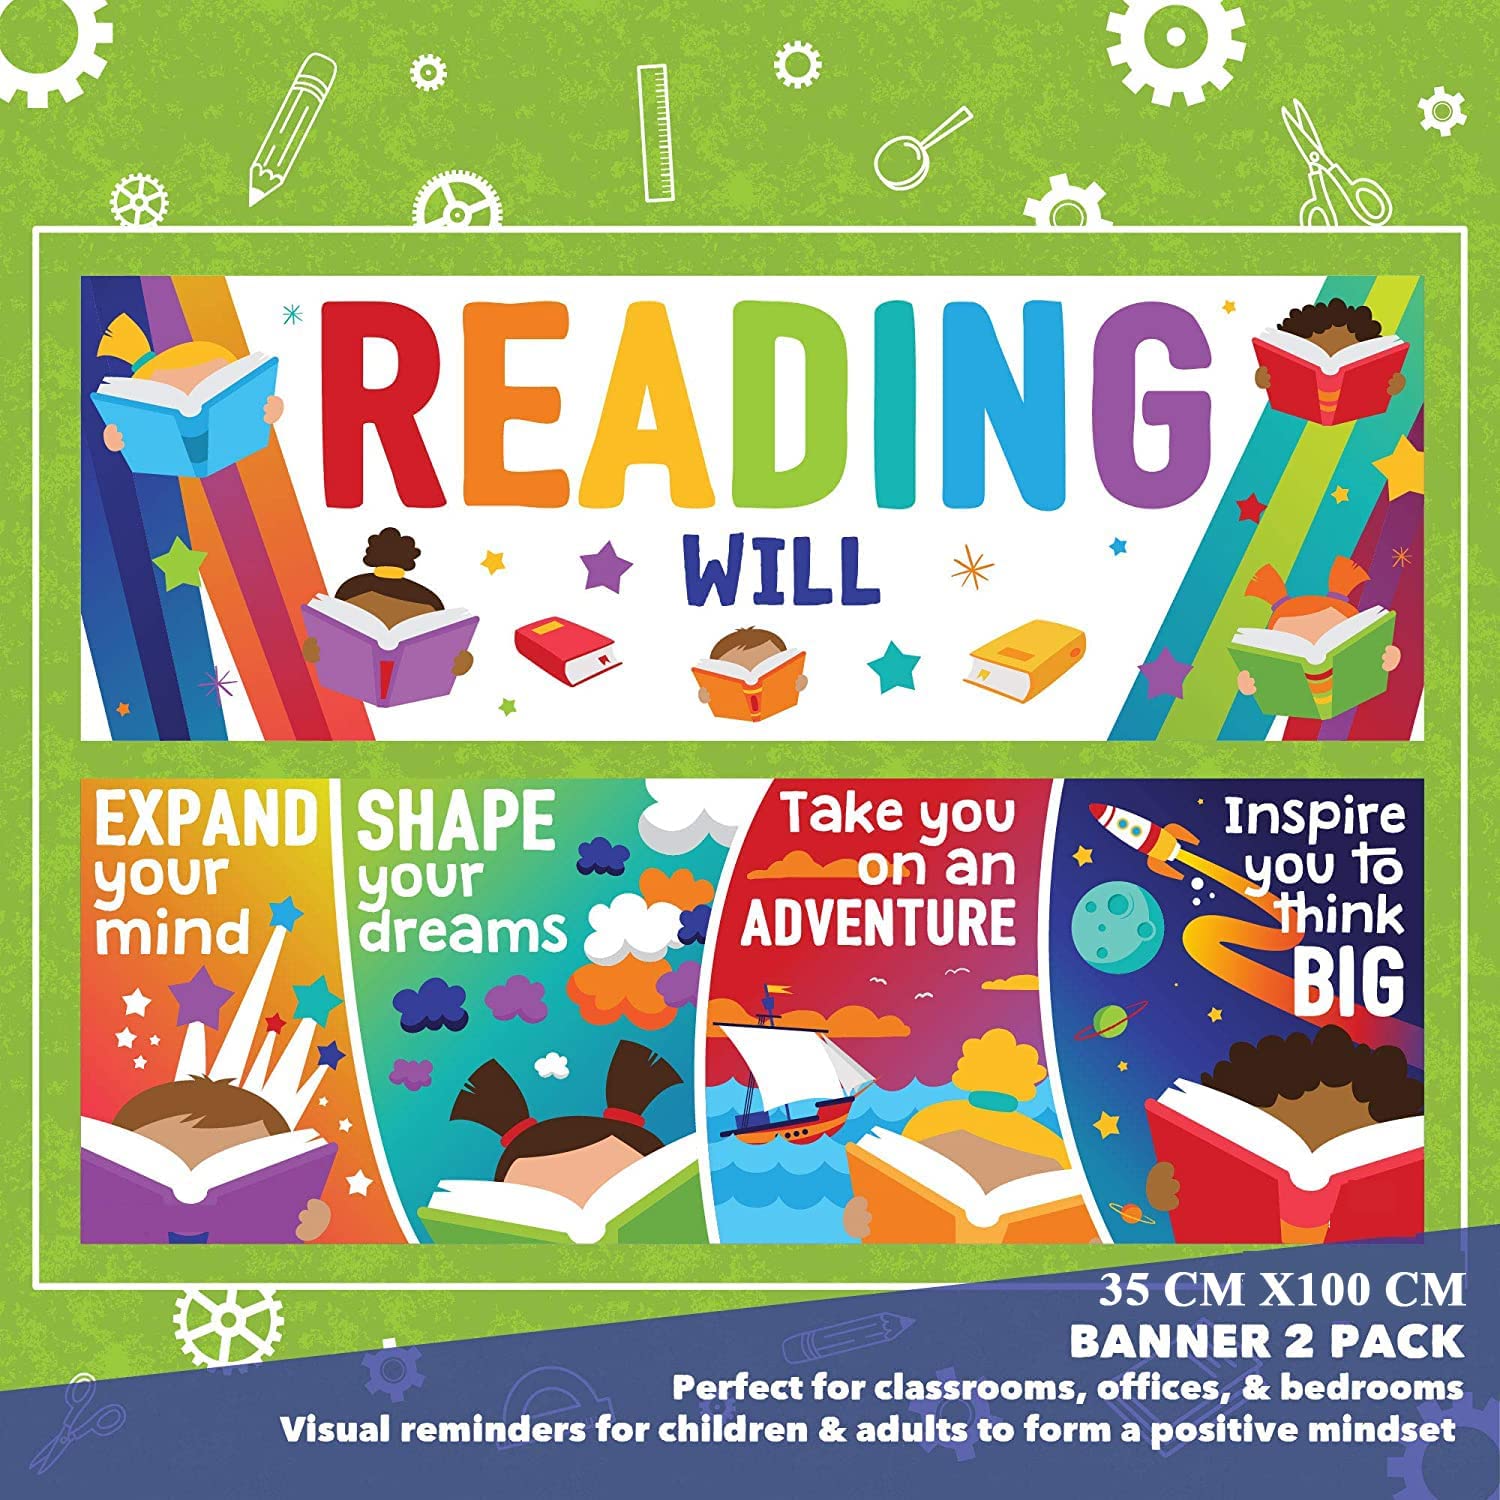 A poster for classrooms in schools about reading 35×100 CM - Multi Color